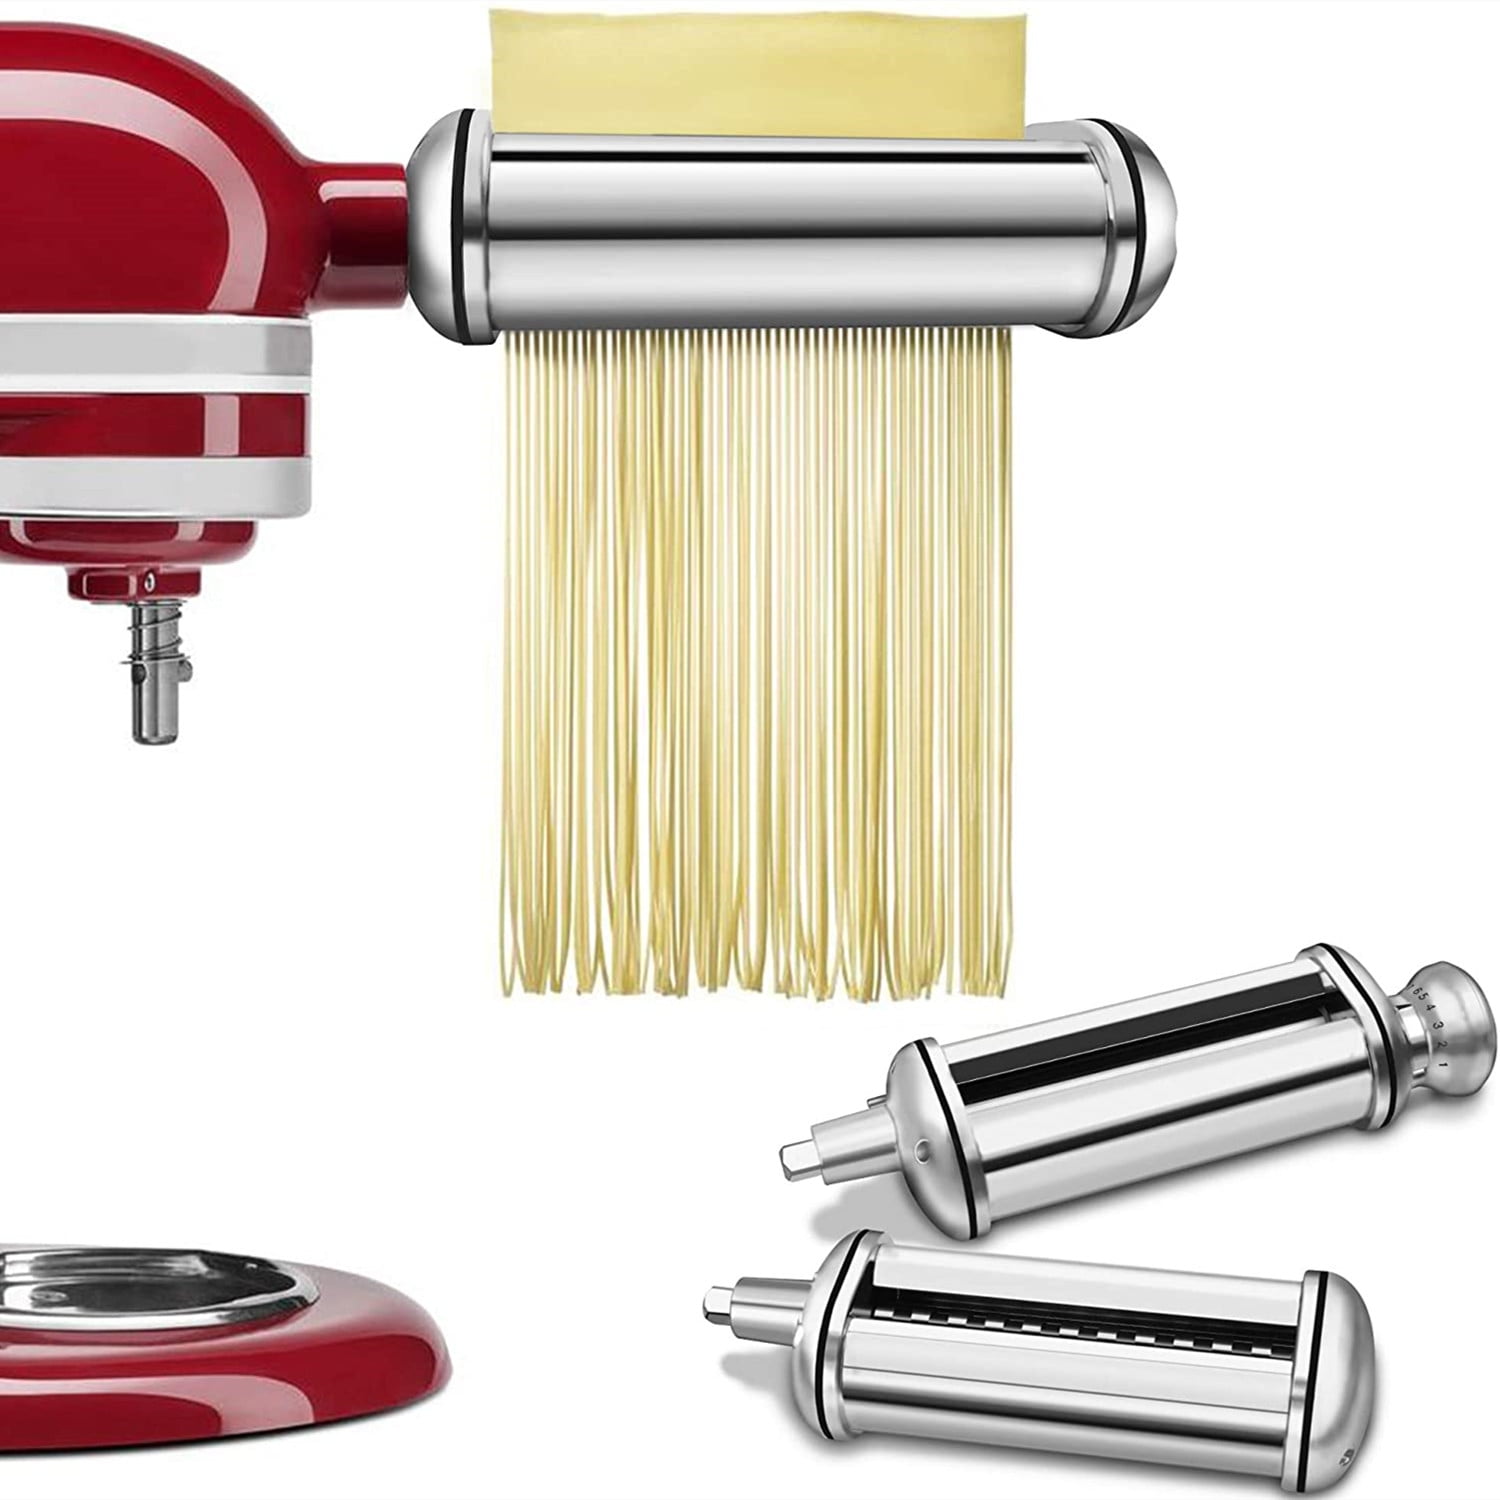 KENOME 20 Piece Pasta Roller and Cutter Attachment Set for ...